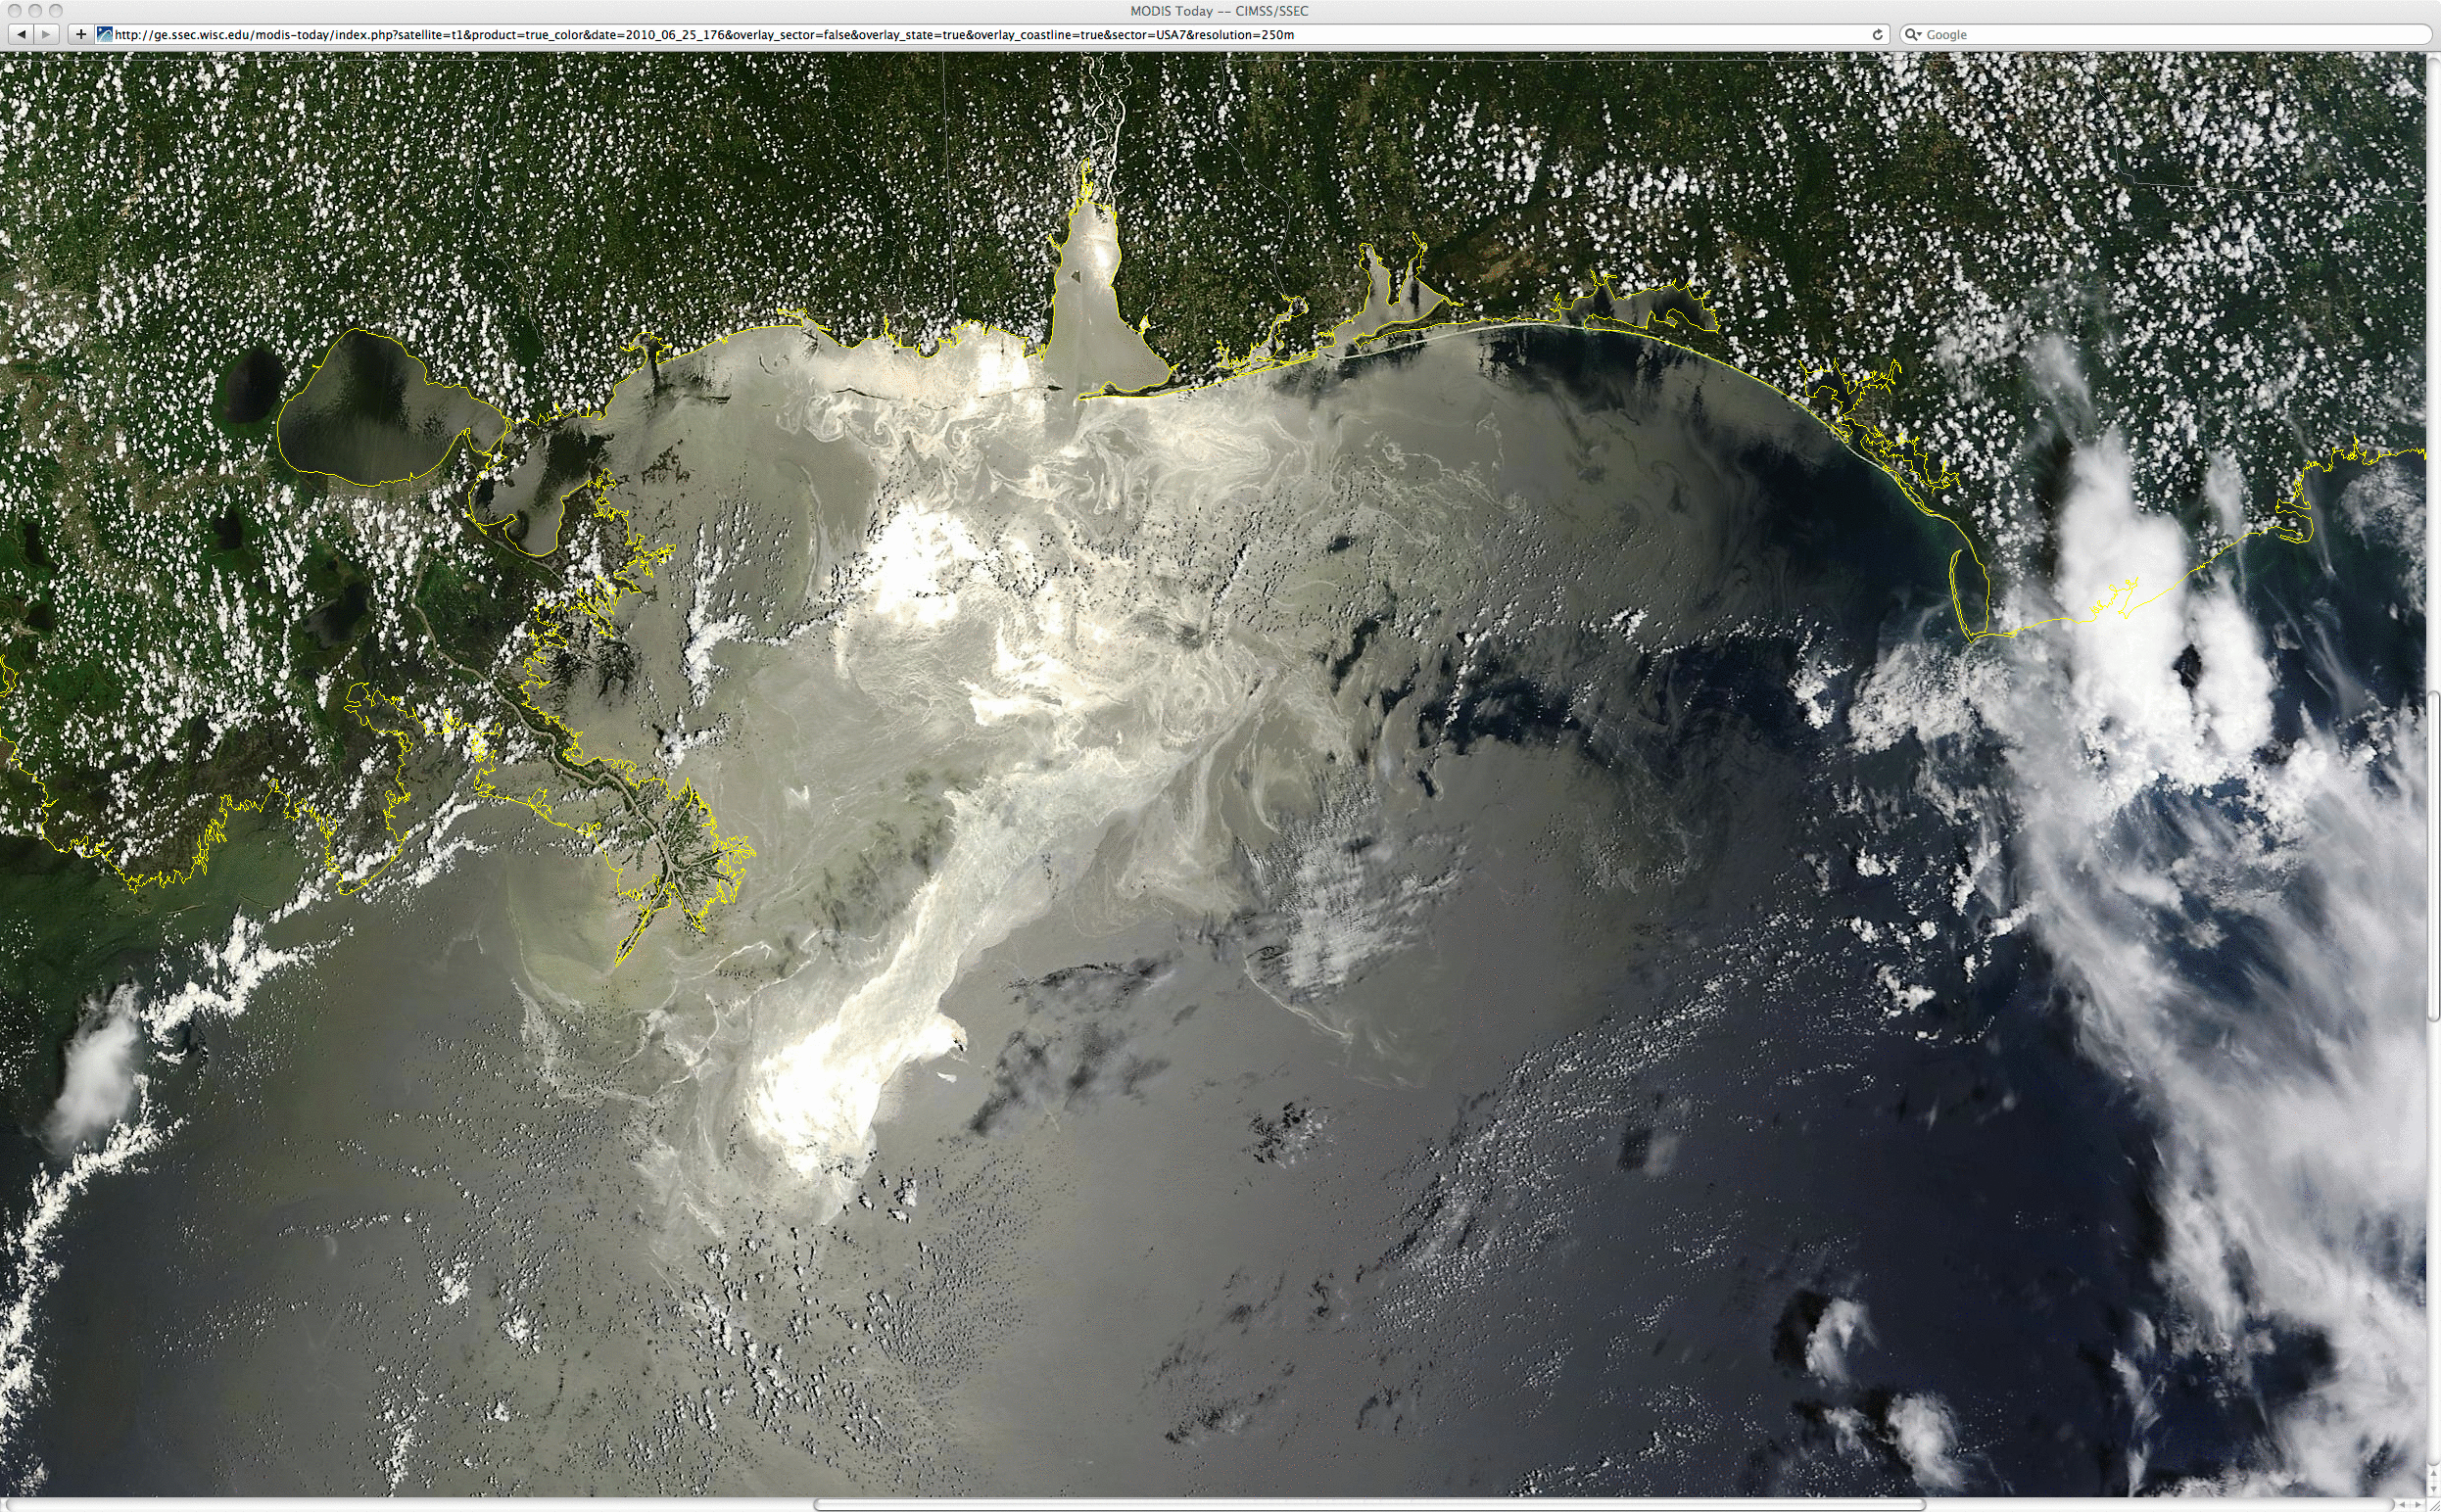 MODIS true color (using bands 1/4/3) and false color (using bands 7/2/1) RGB images